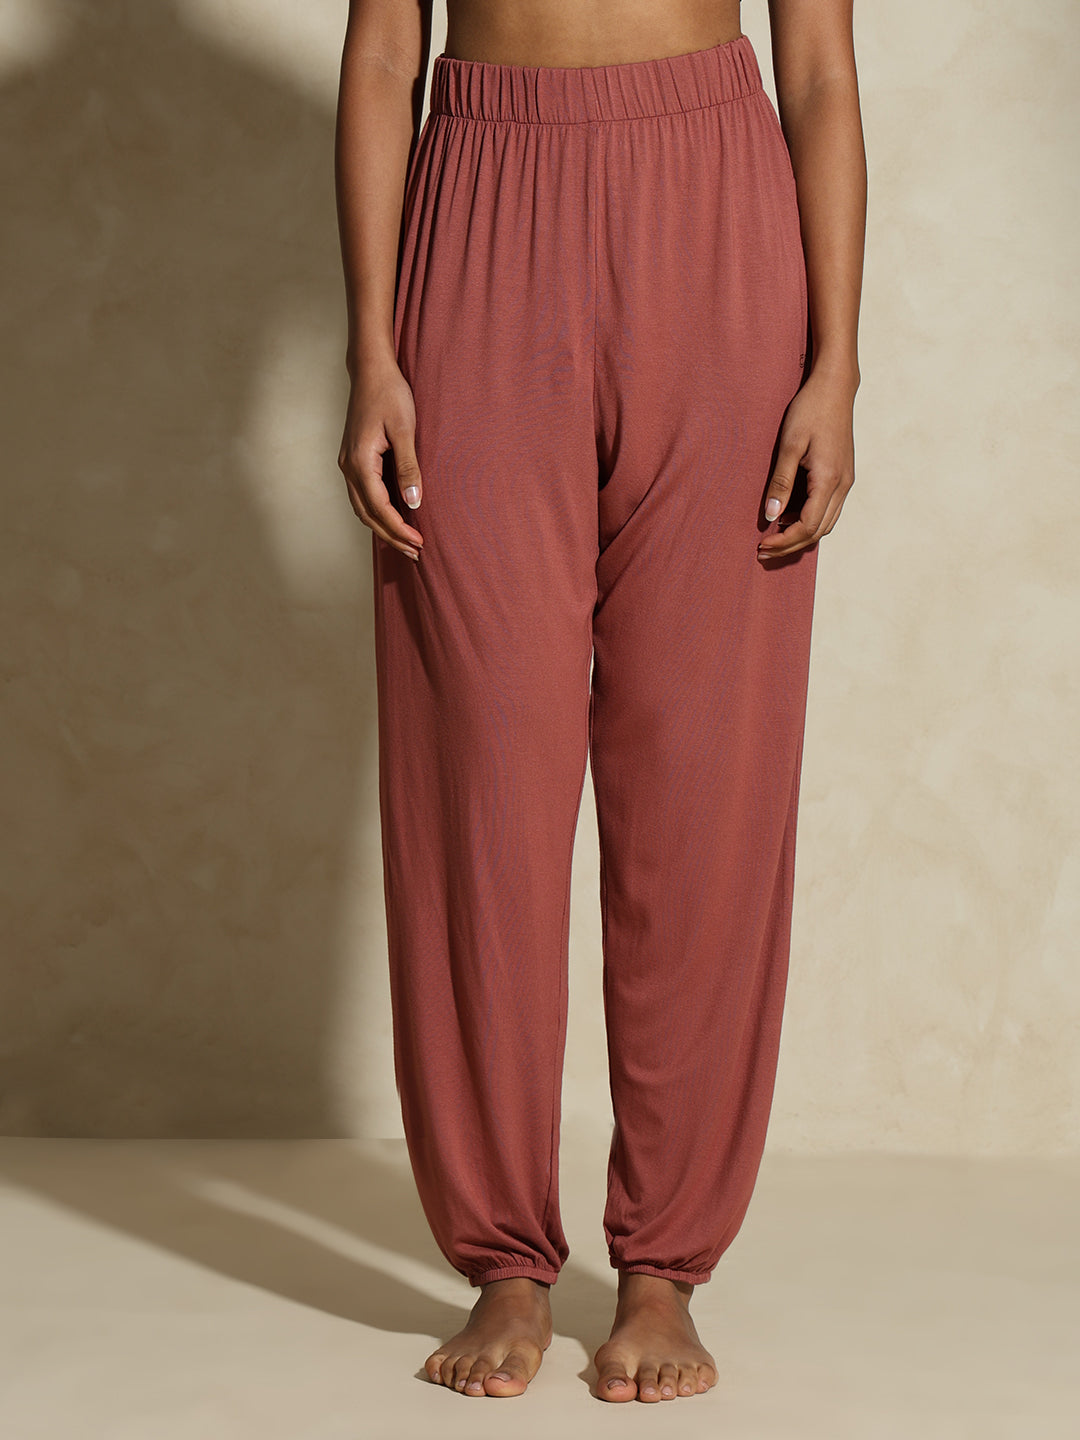 Silvertraq Launches Brand New Loungewear Collection For Women! - Women  Fitness Org